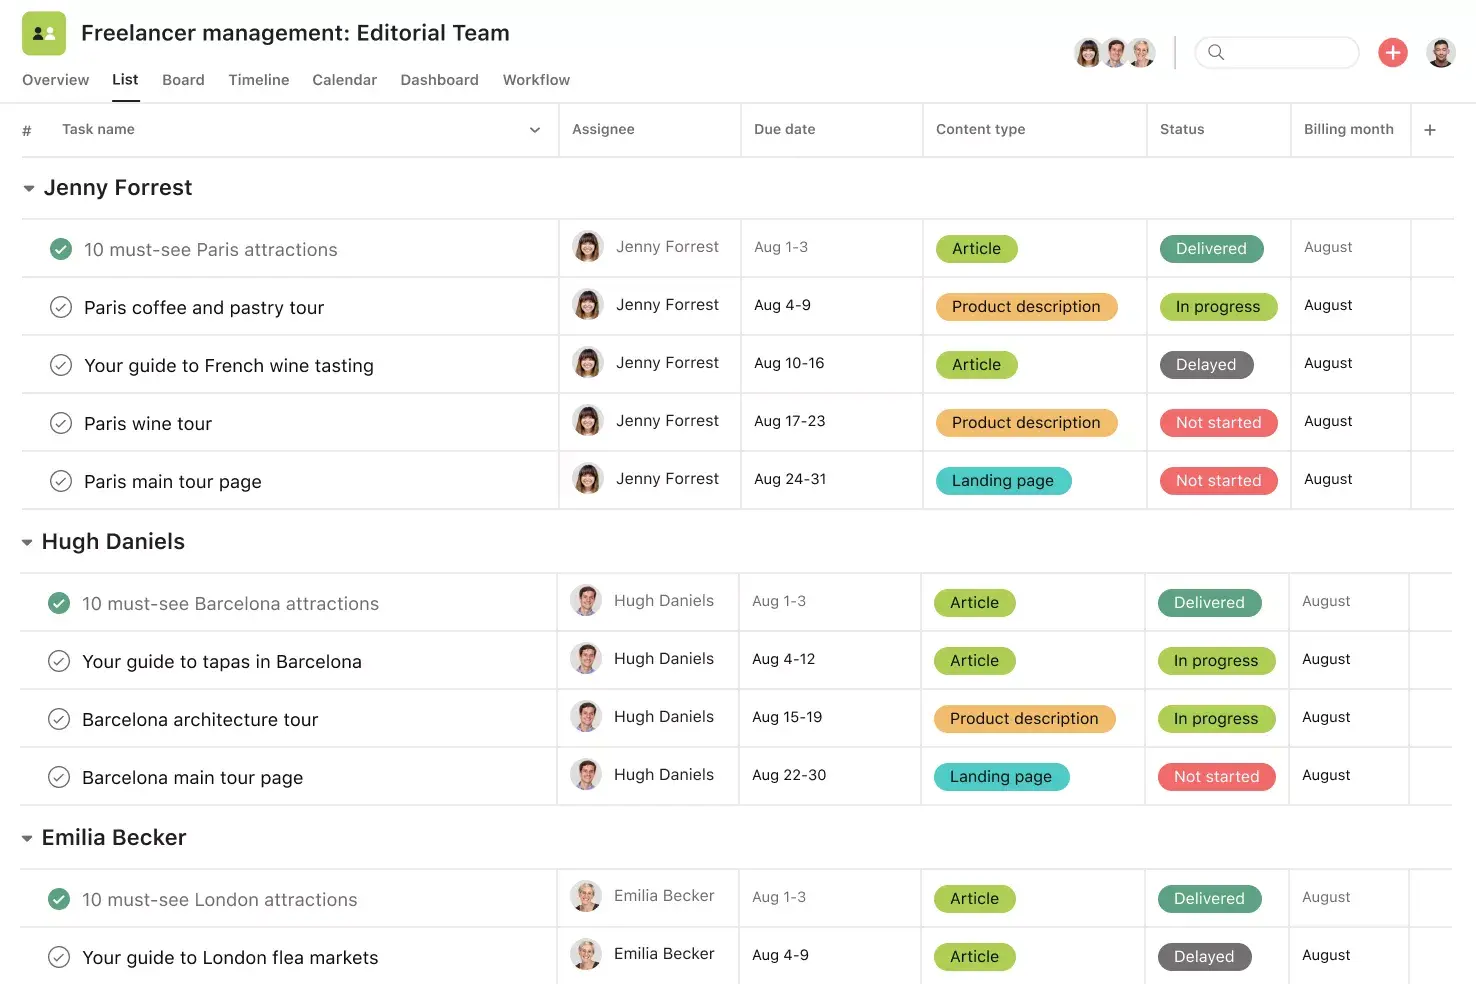 [product ui] Freelancer management project in Asana, spreadsheet-style project view (List)